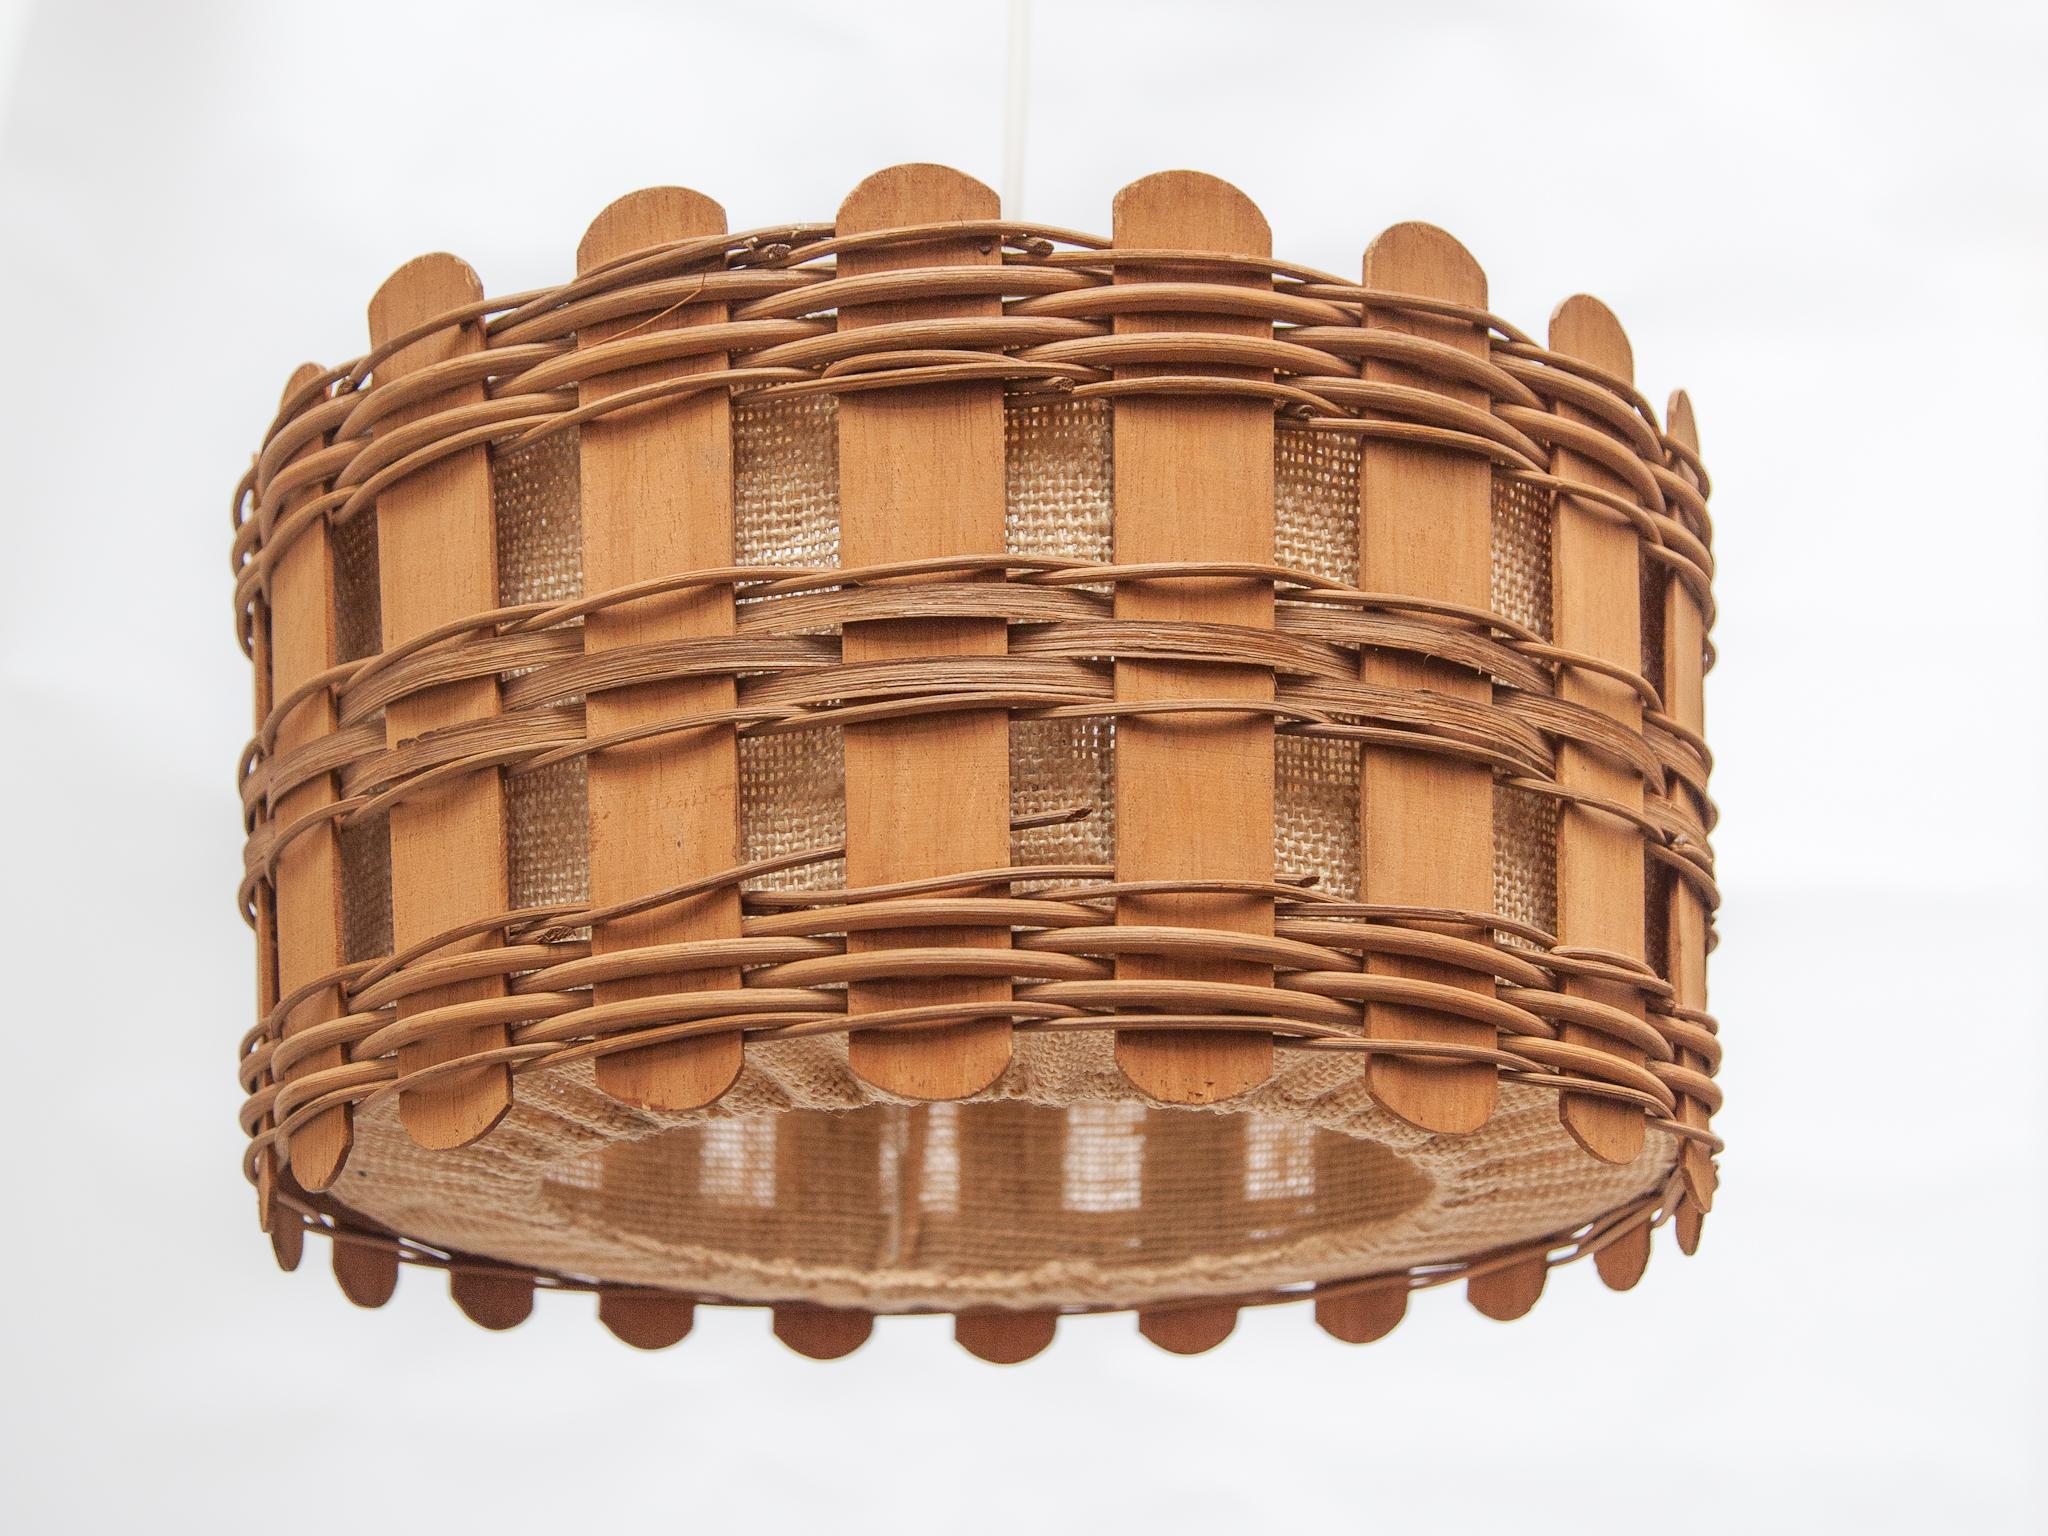 Teak and jute round lampshade with wood slats and fabric 1960s designed by Massive Belgium.